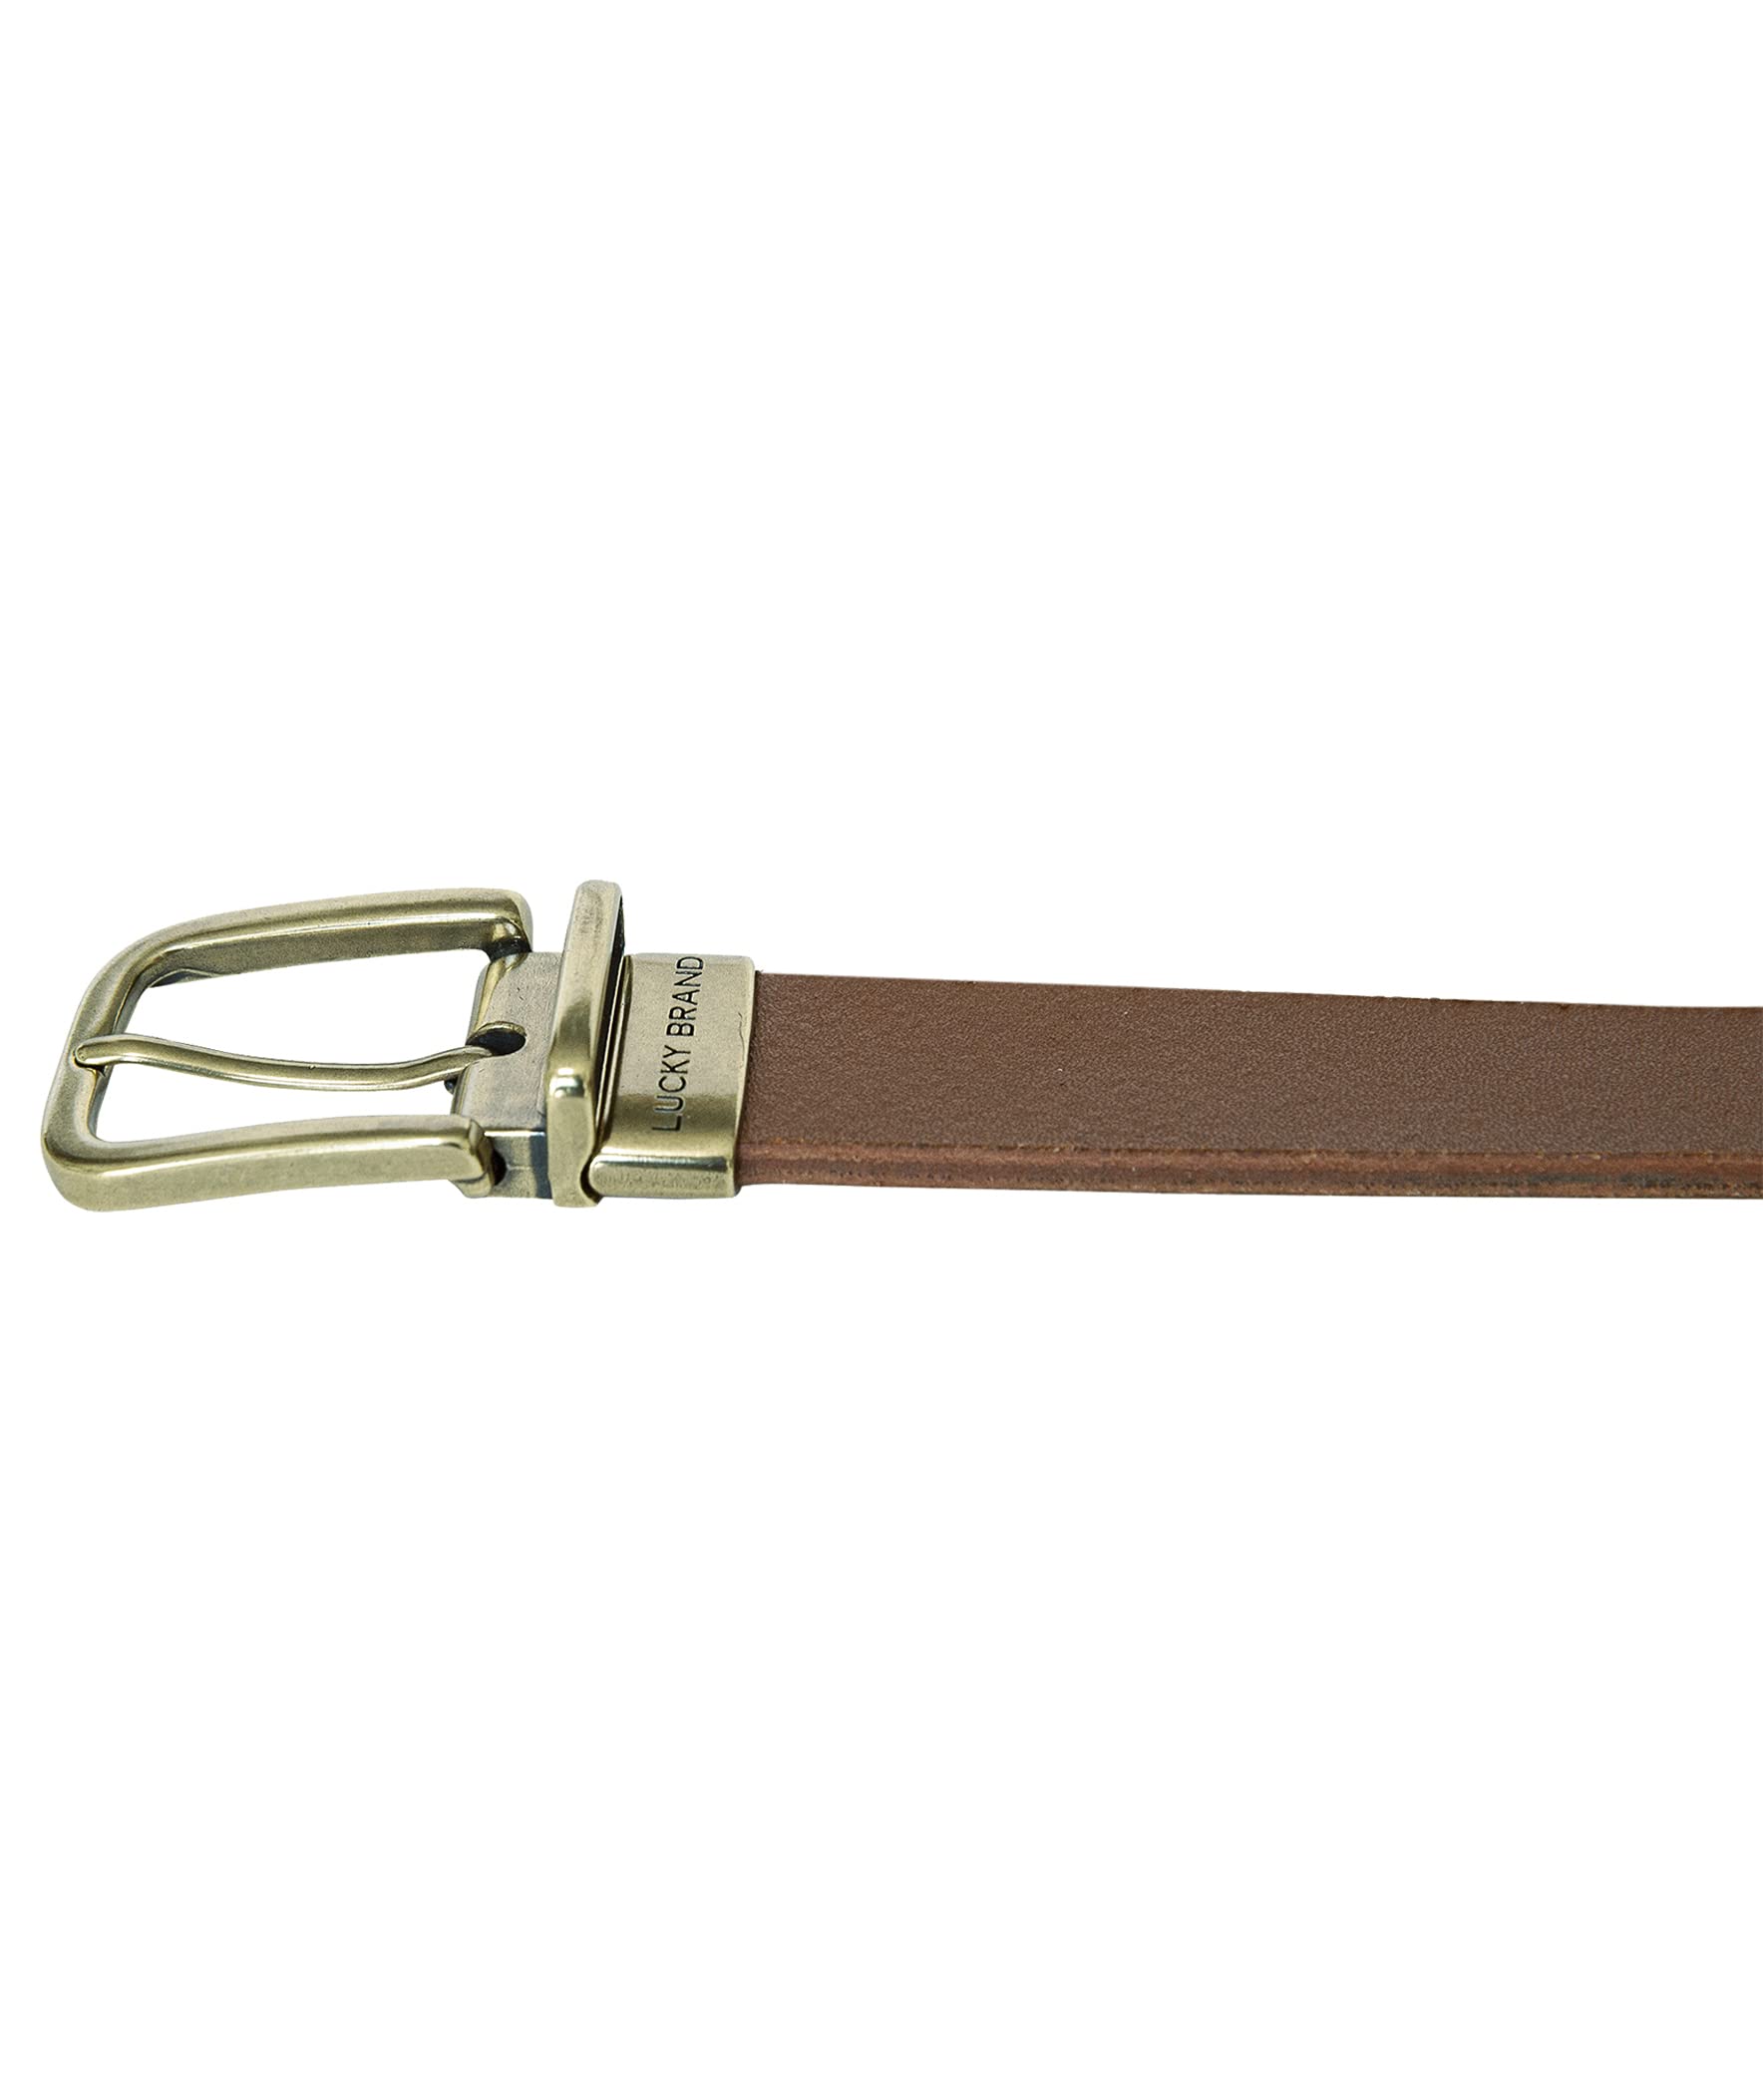 Lucky Brand Women's Reversible Smooth Leather Belt with Old English Brass Harness Buckle, Tan/Natural, Small